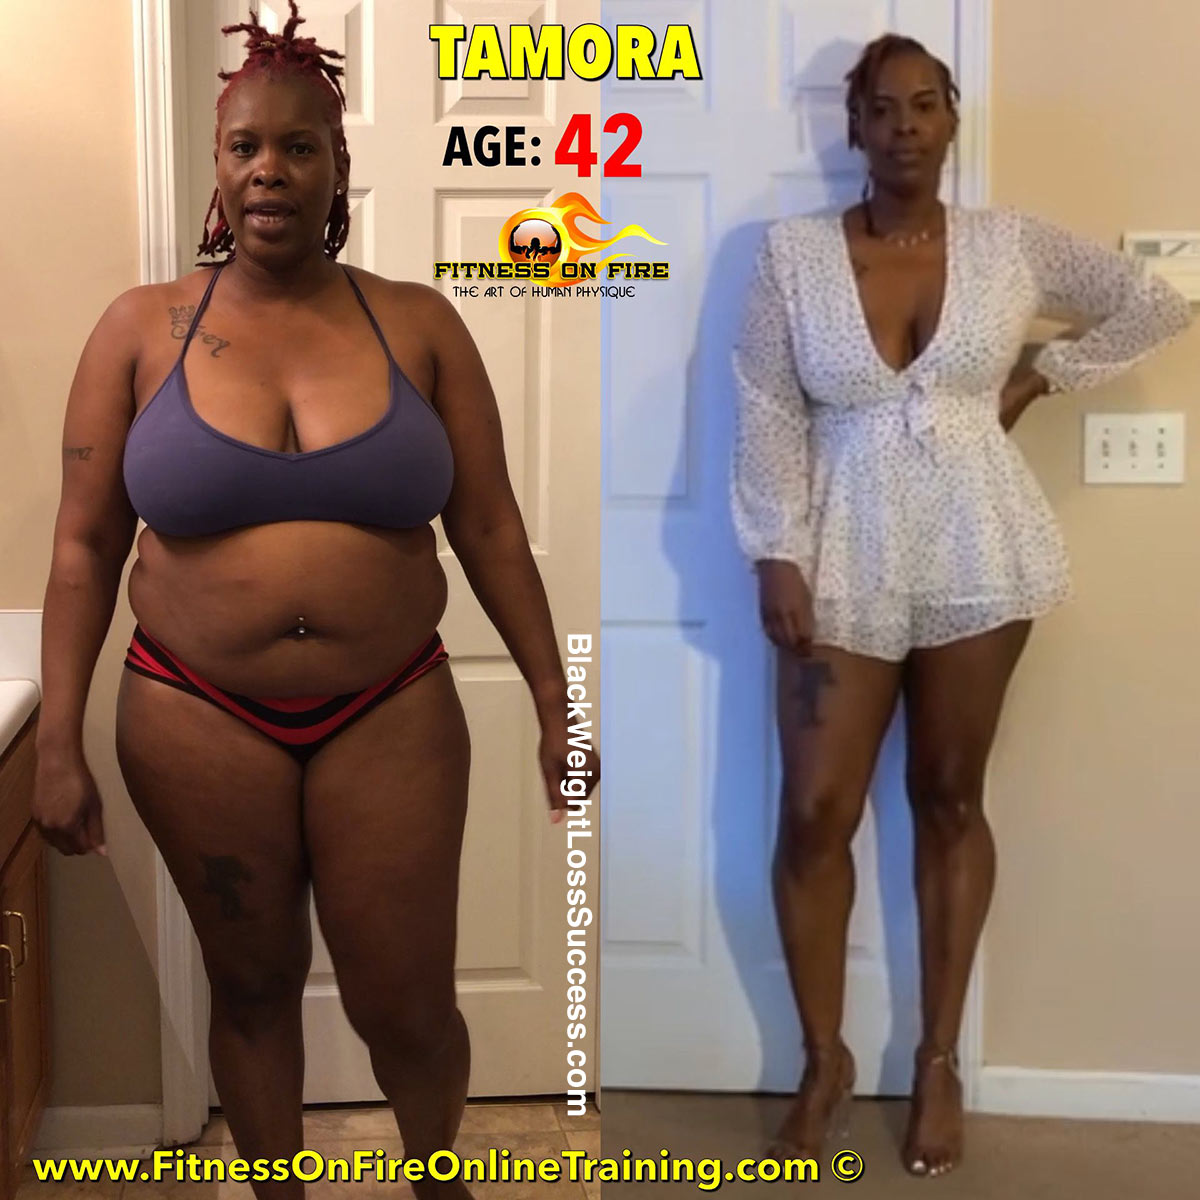 Tamora before and after